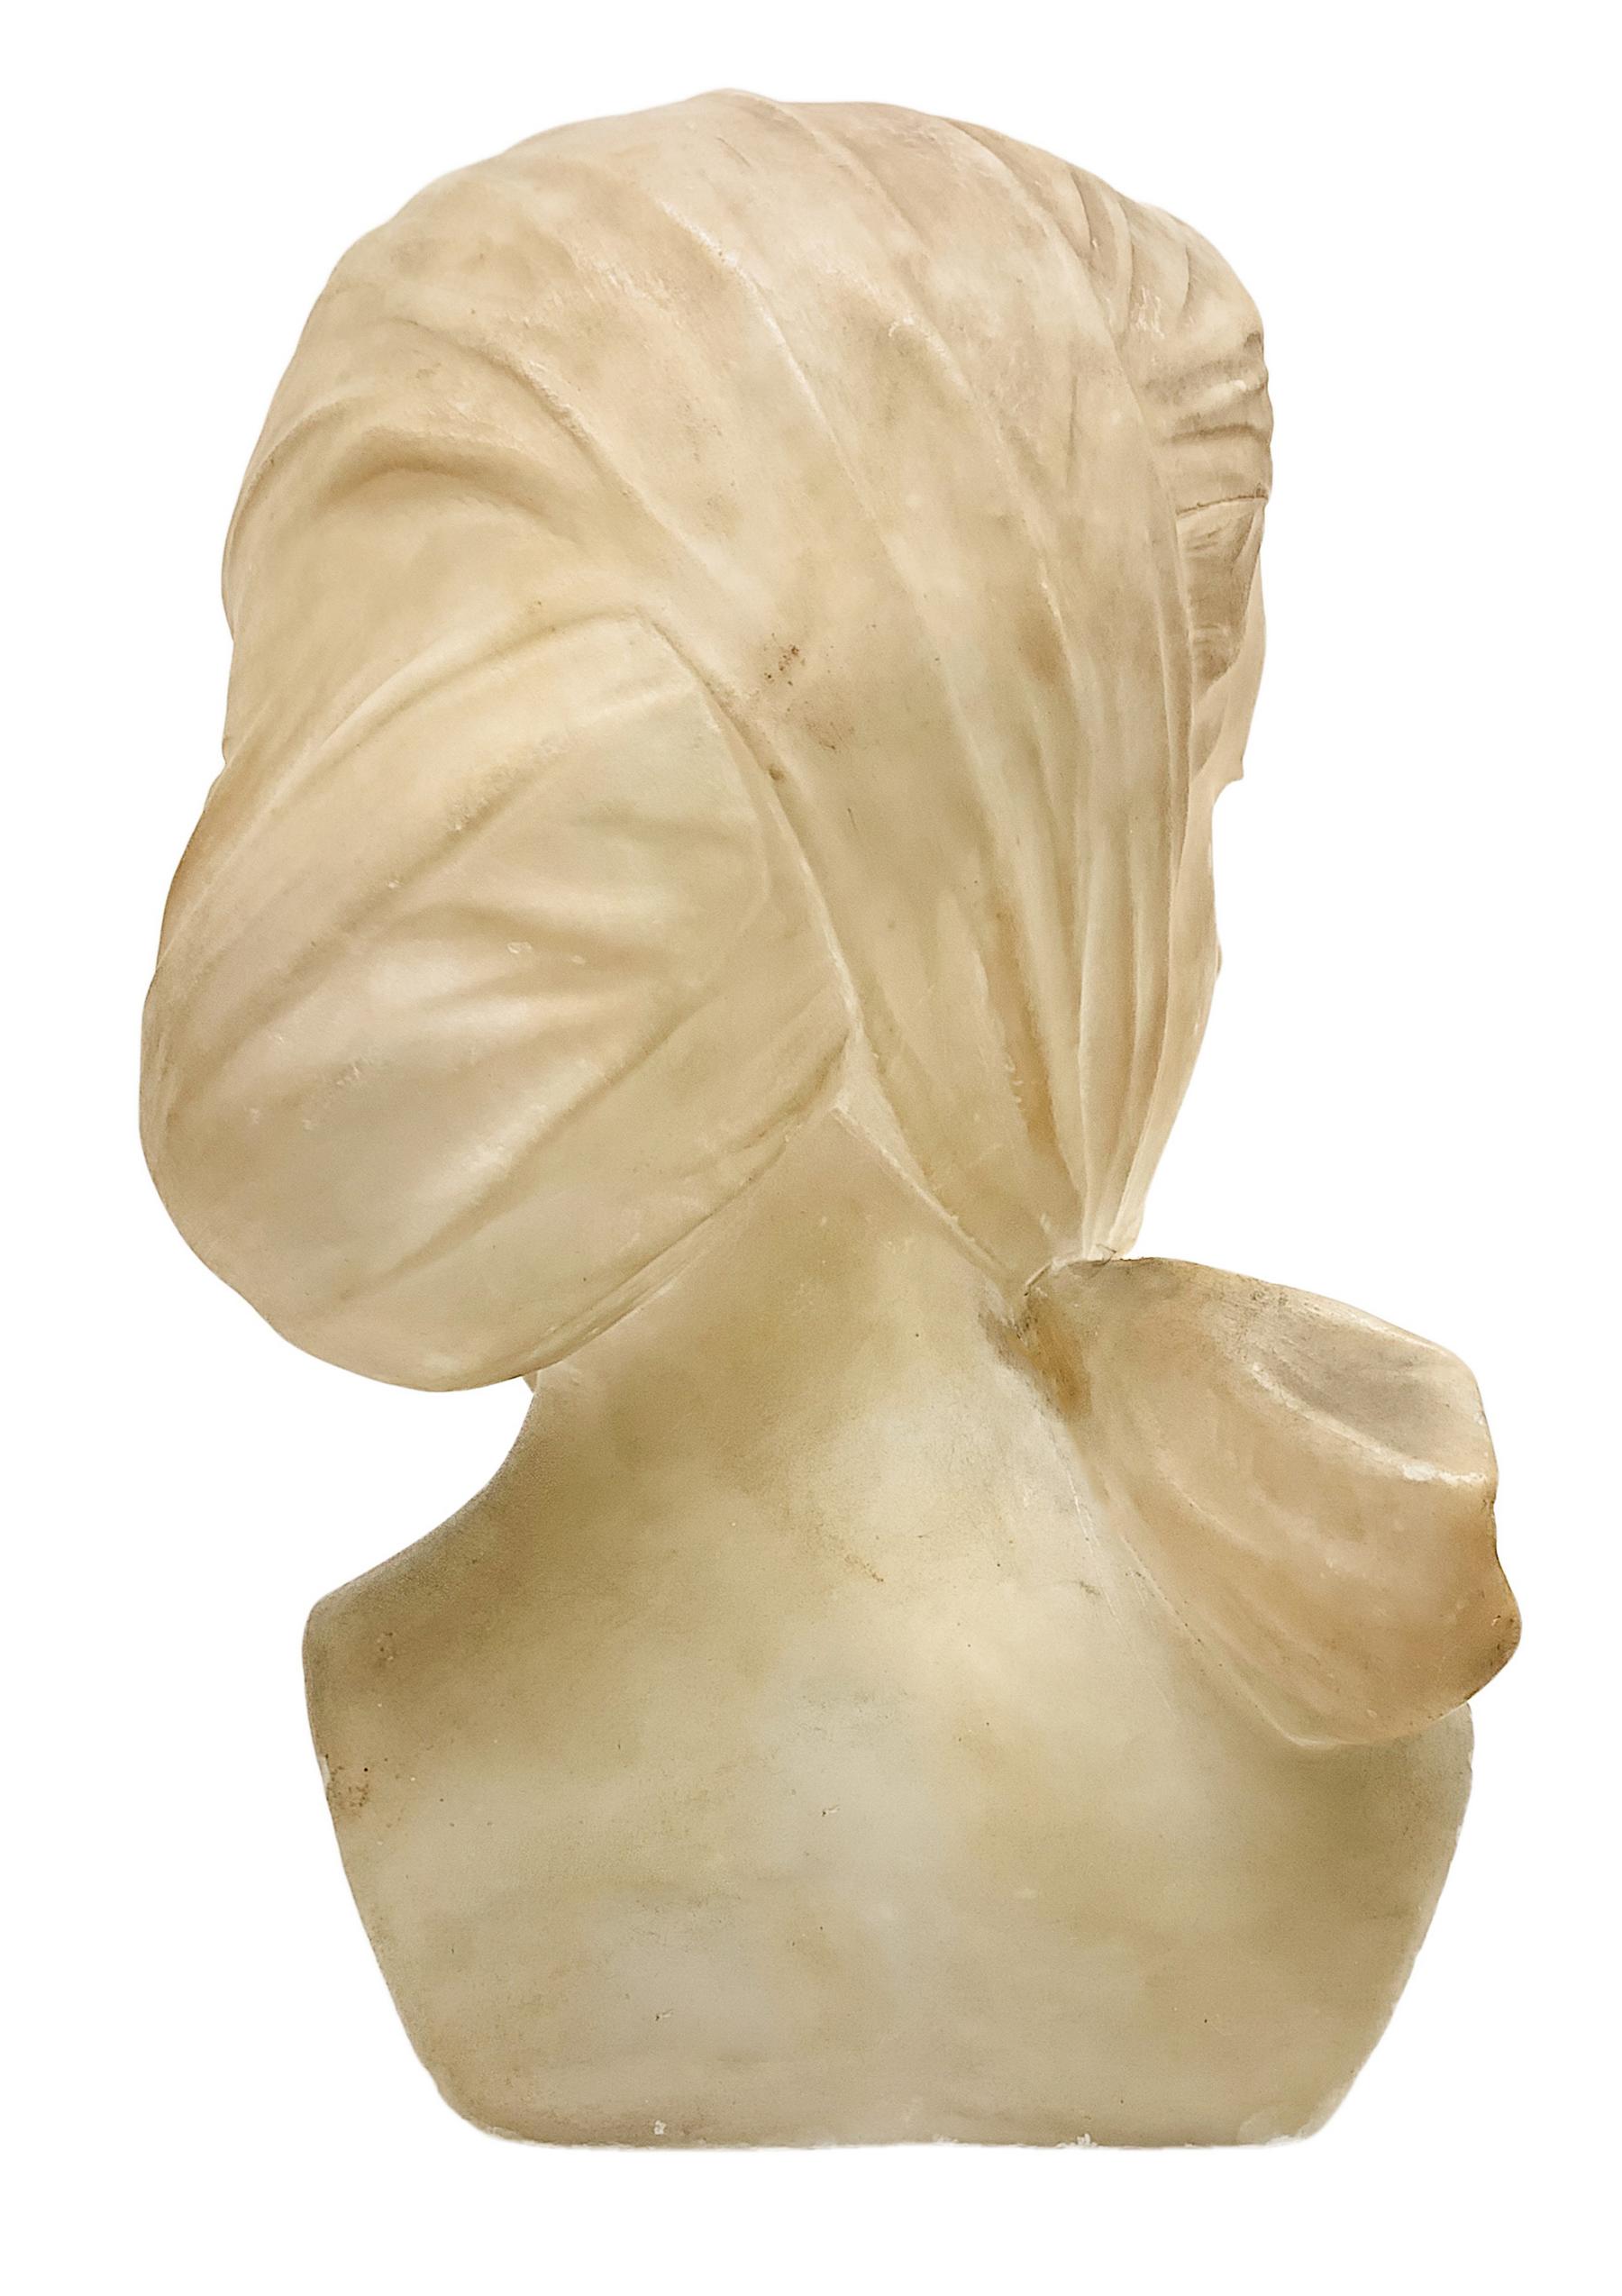 White marble statuette depicting a young woman with fulare head. H cm 19. Base 7x9 cm. - Image 5 of 6